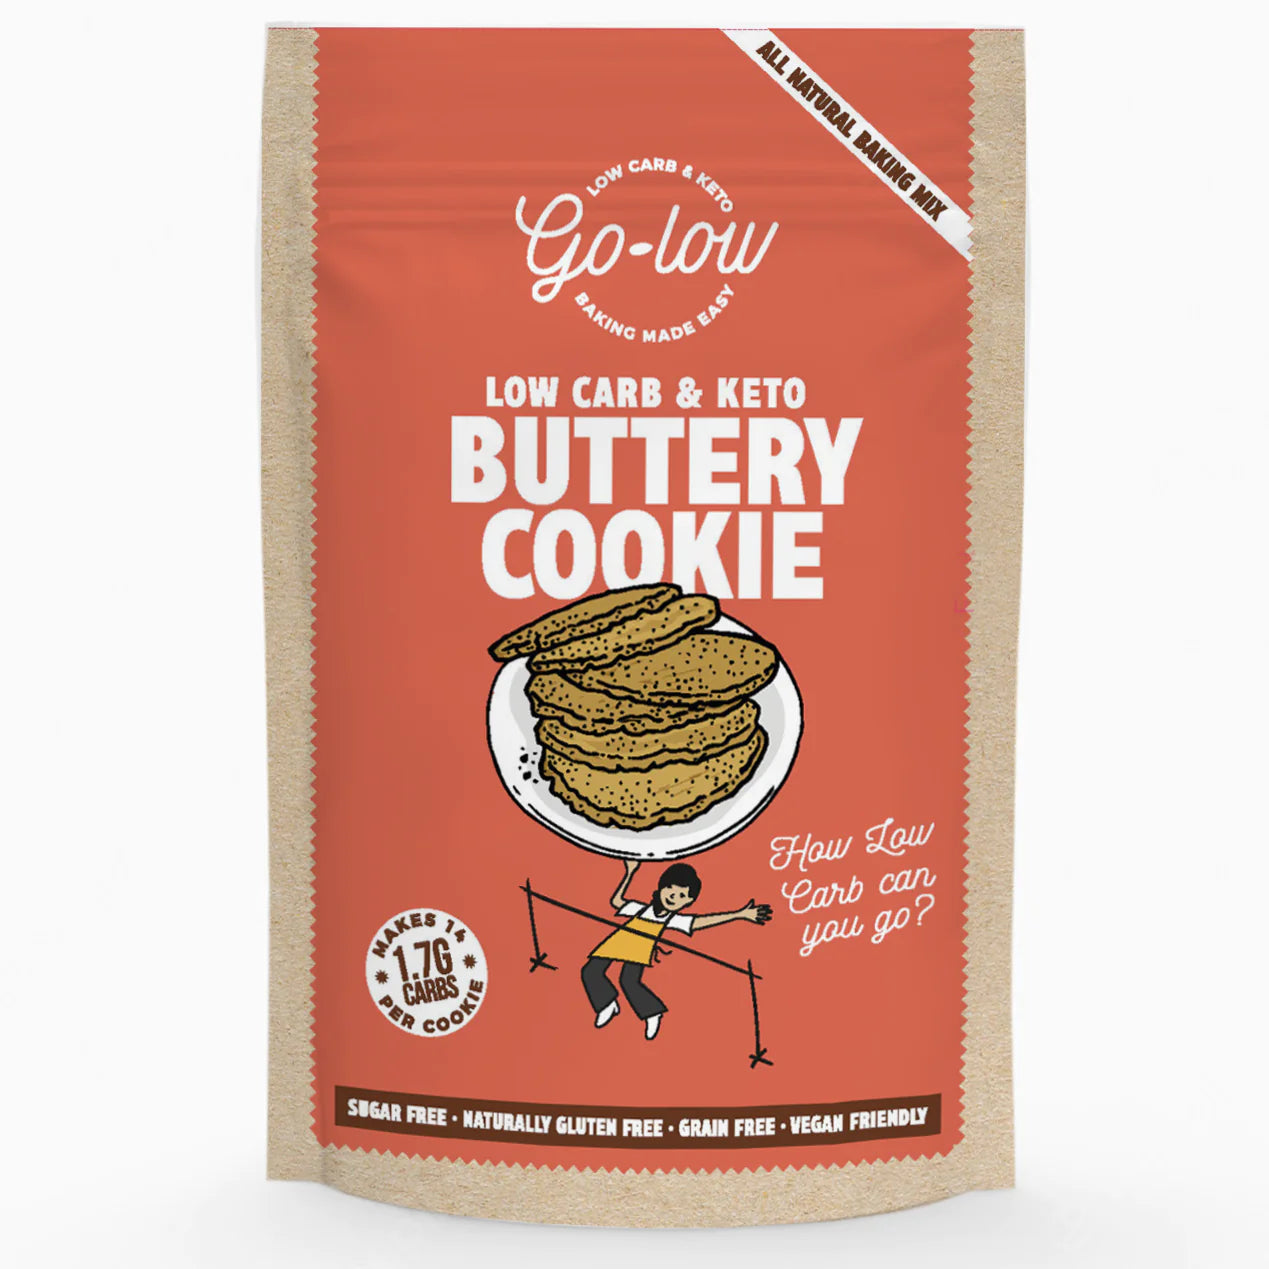 Keto Buttery Cookie Mix- Makes 14 Cookies